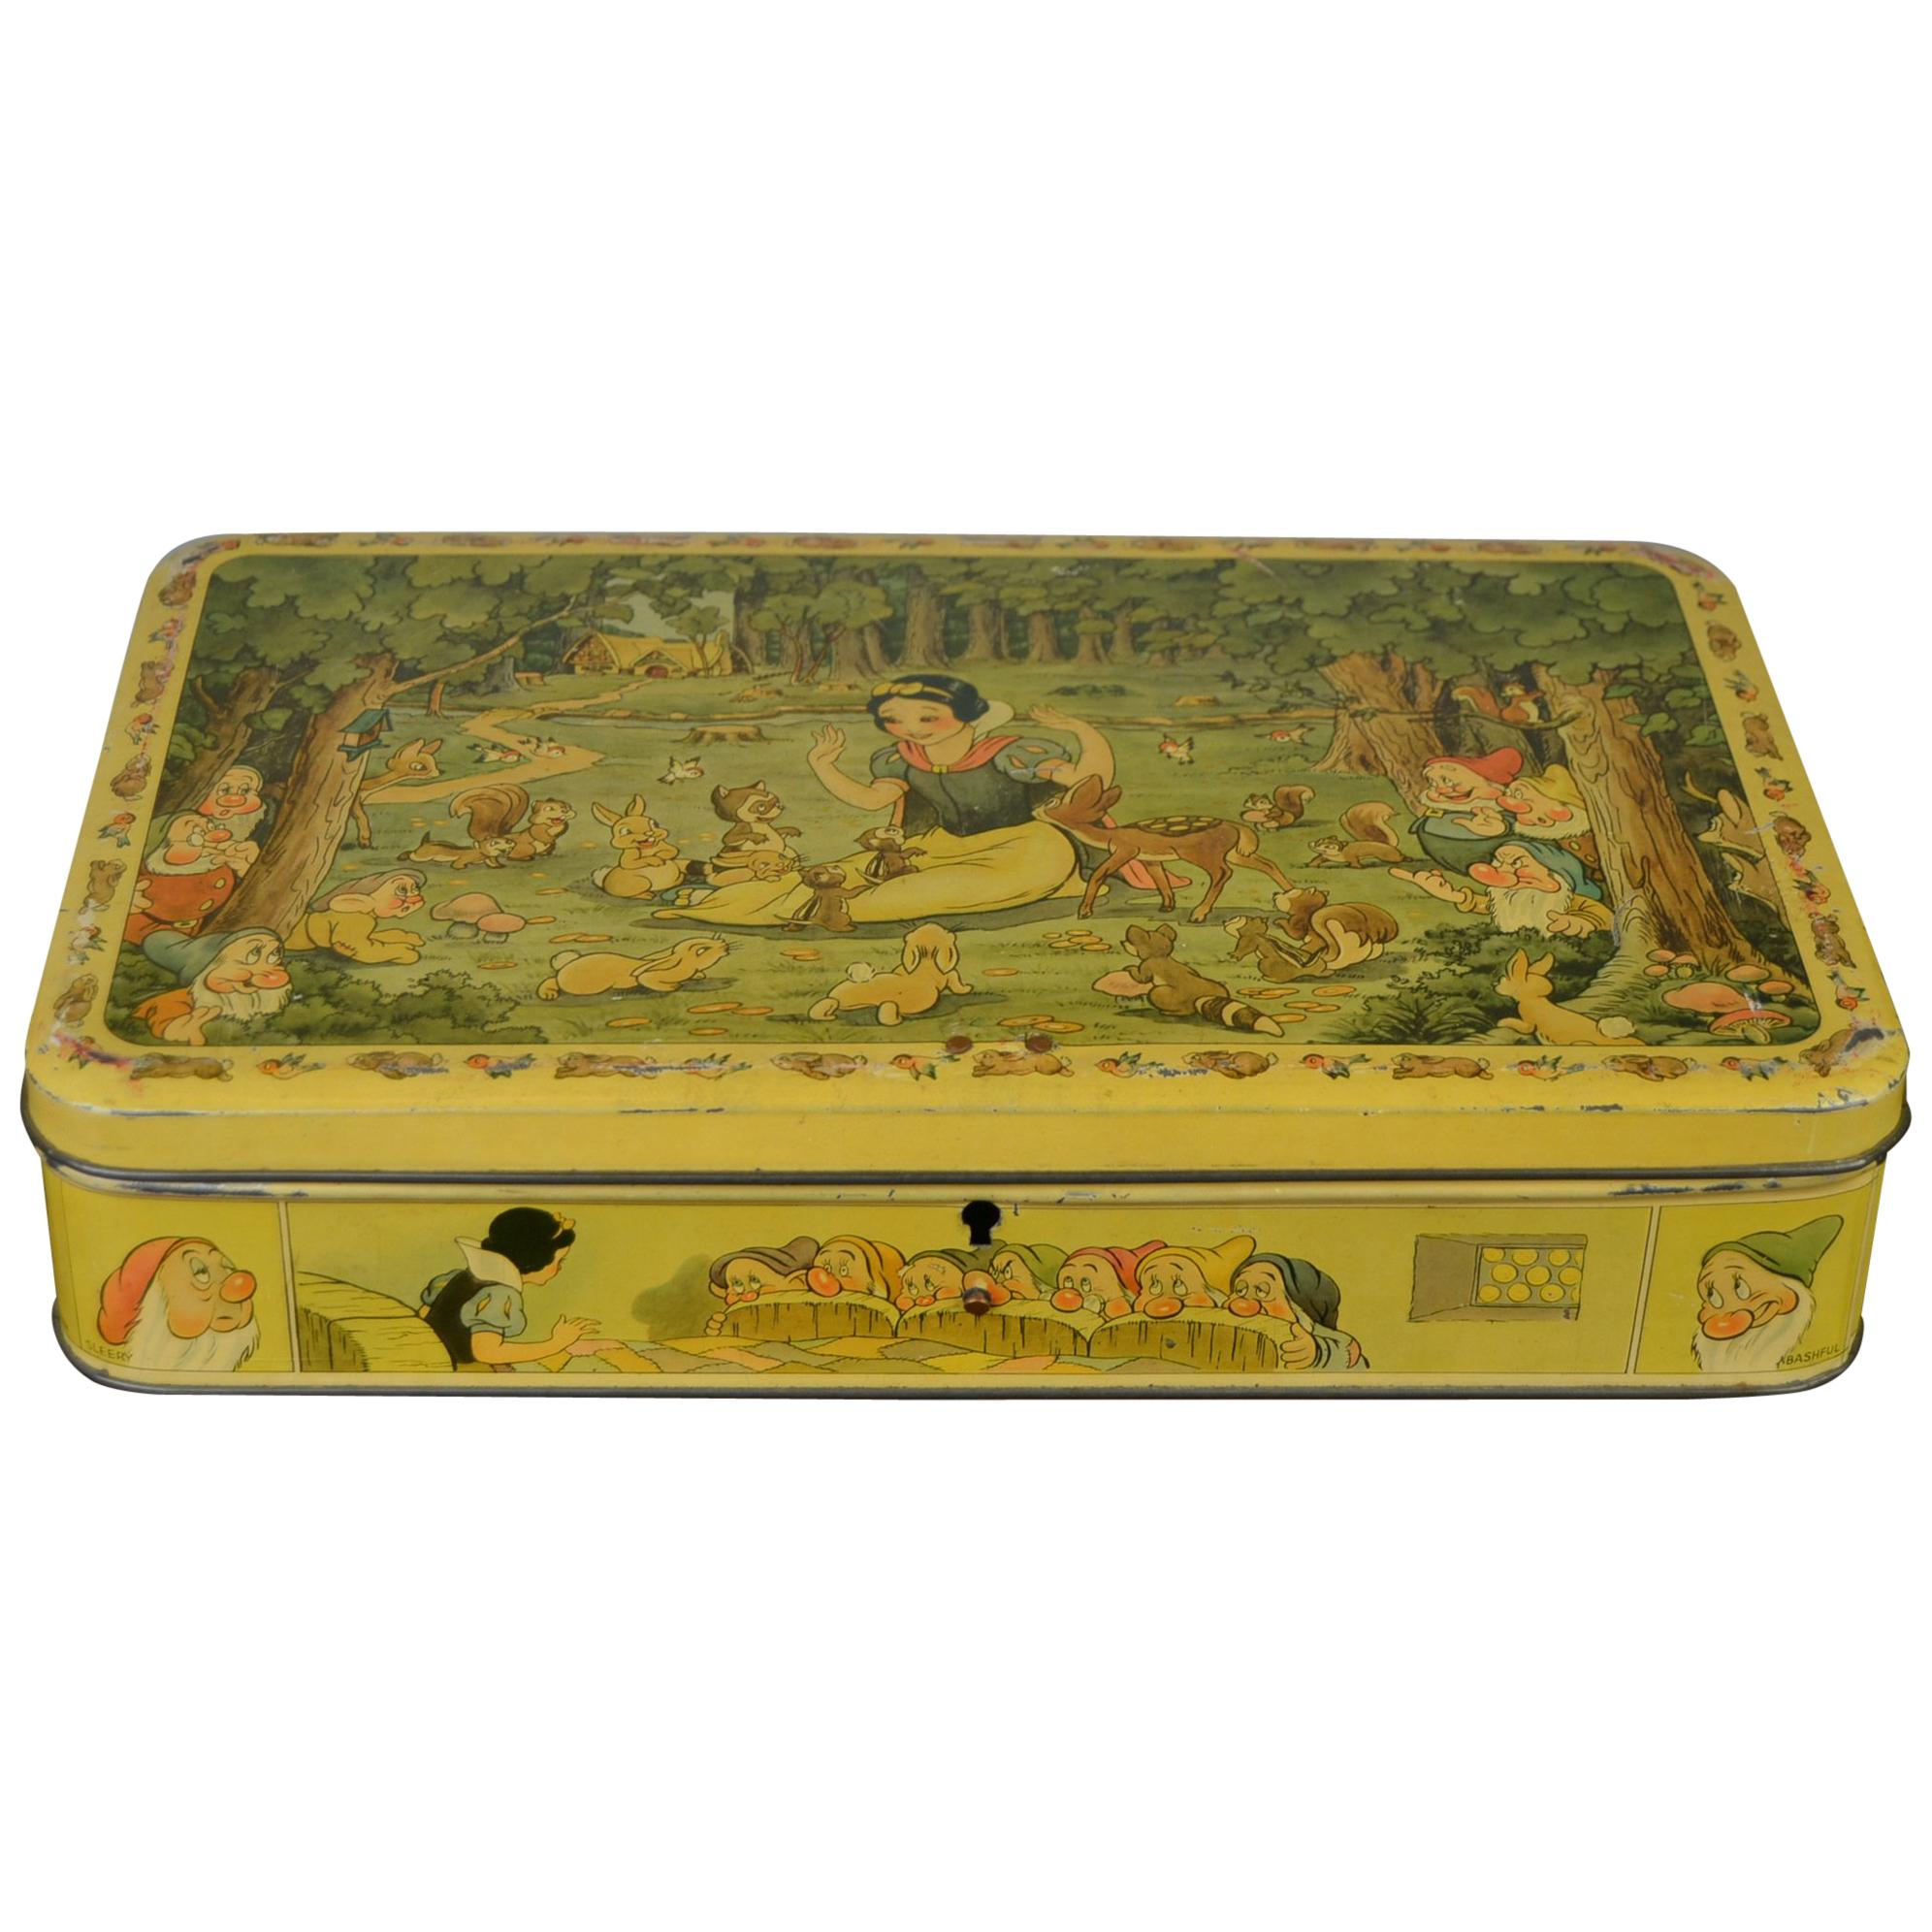 Walt Disney Biscuit Tin, Snow White and the Seven Dwarfs, Late 1930s, Belgium